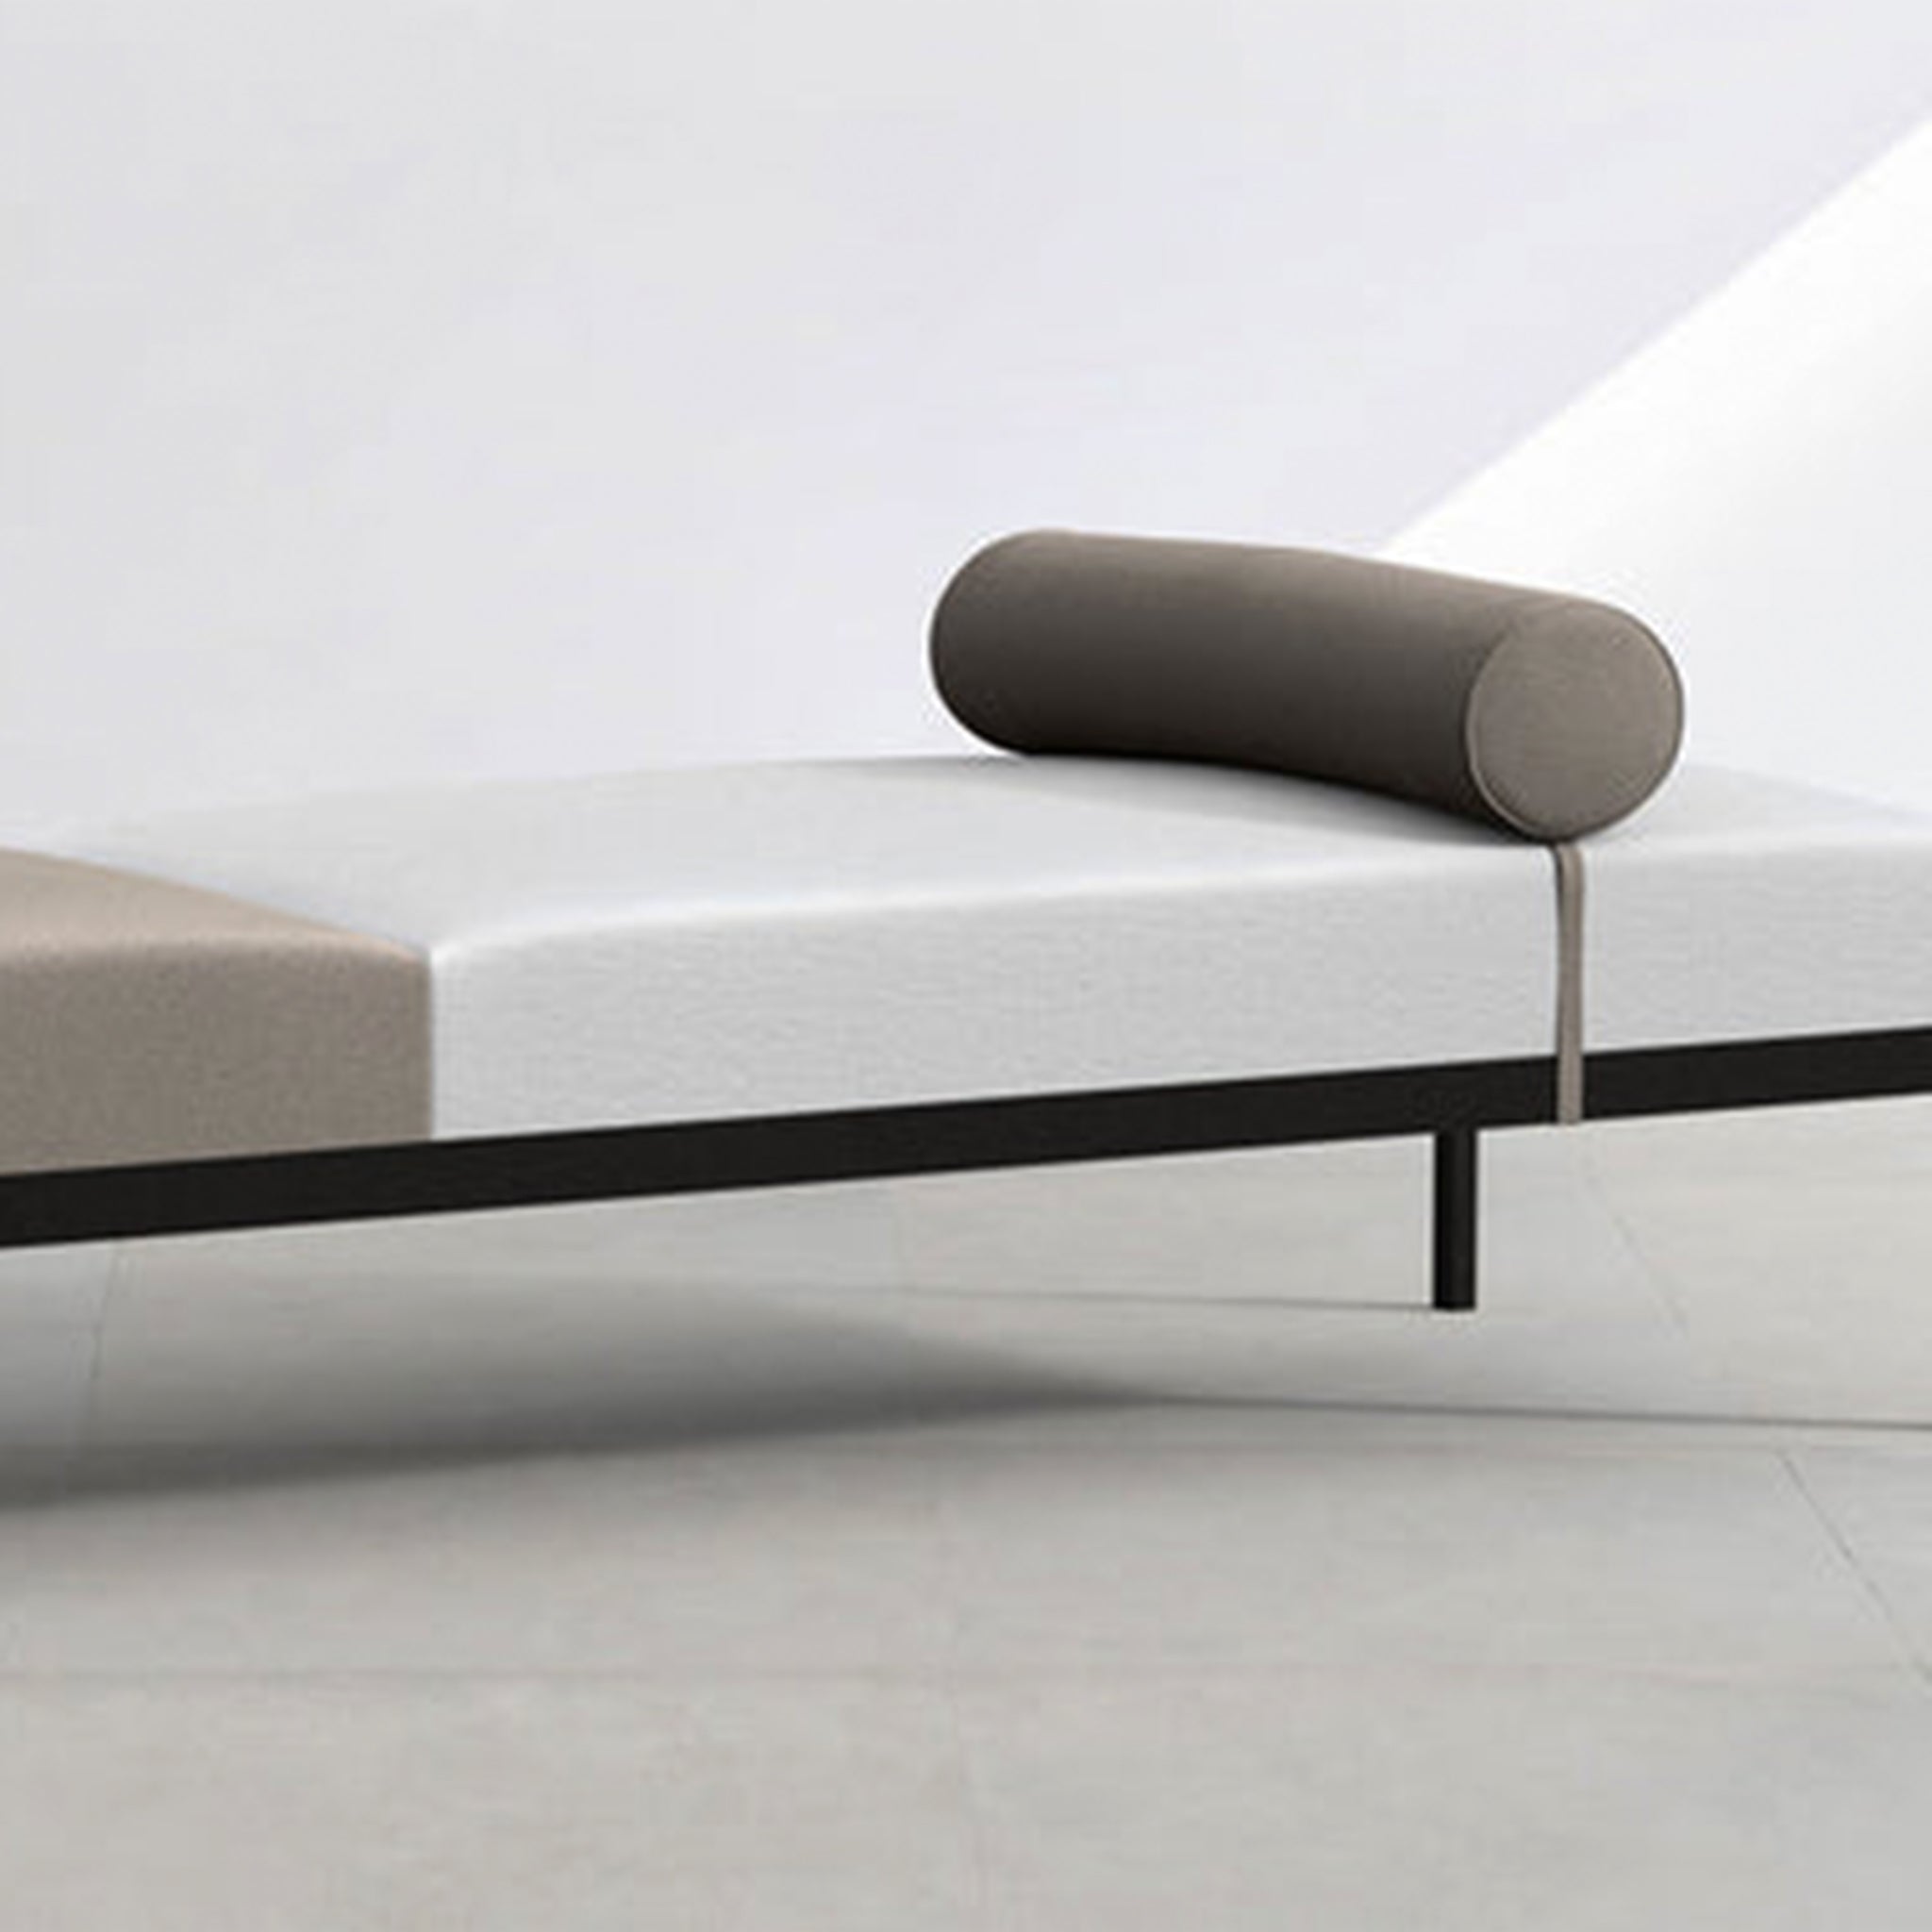 The Rodman Day Bed featuring a vegan leather bolster cushion.